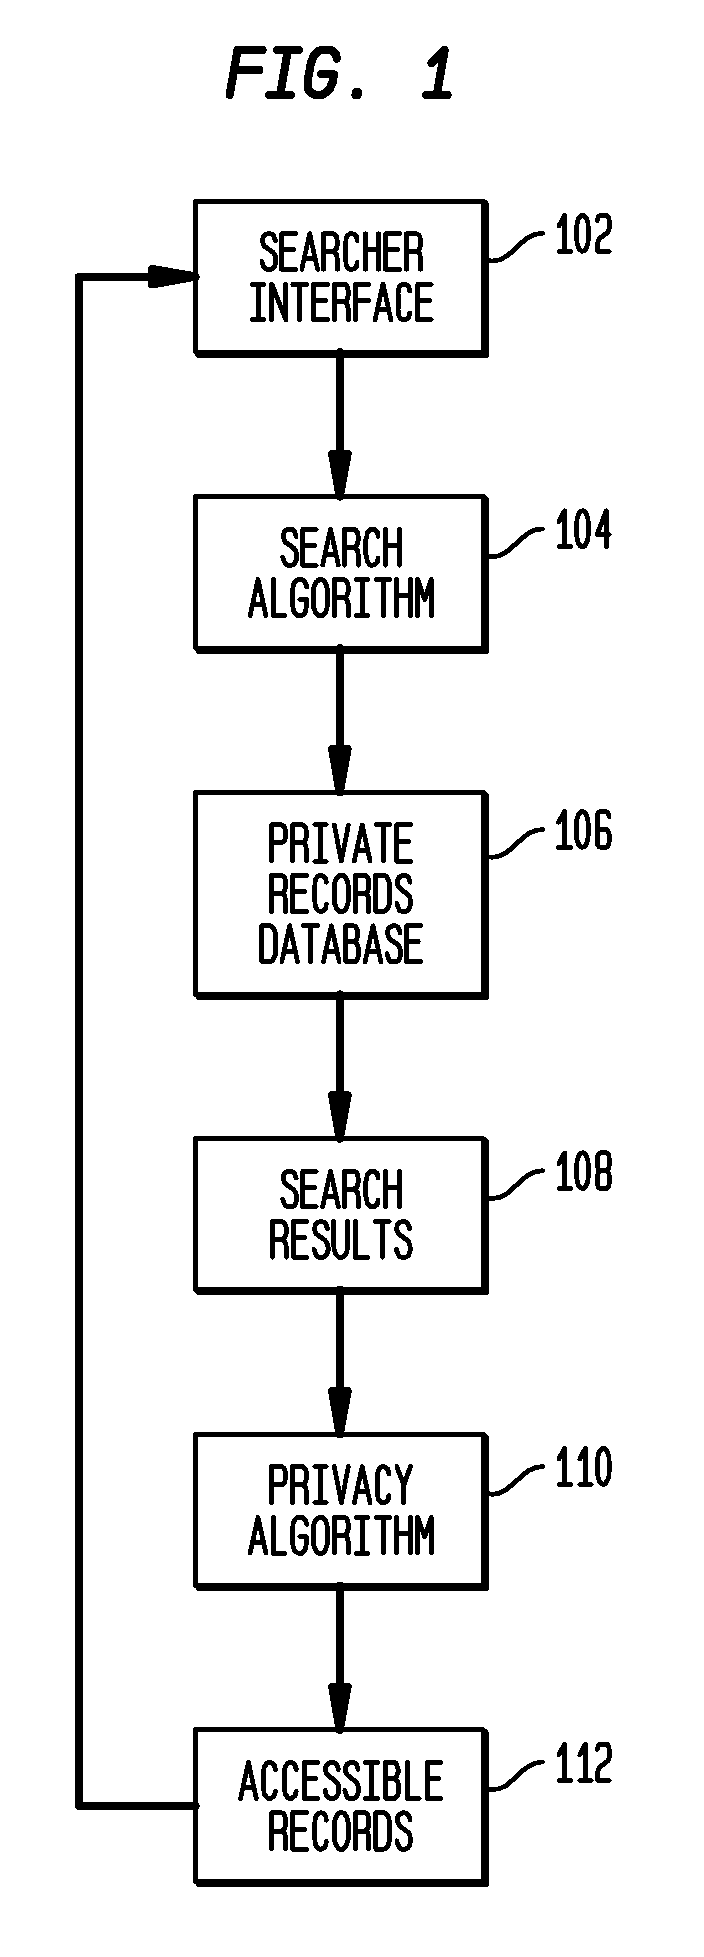 System and method for recruiting subjects for research studies and clinical trials over the internet